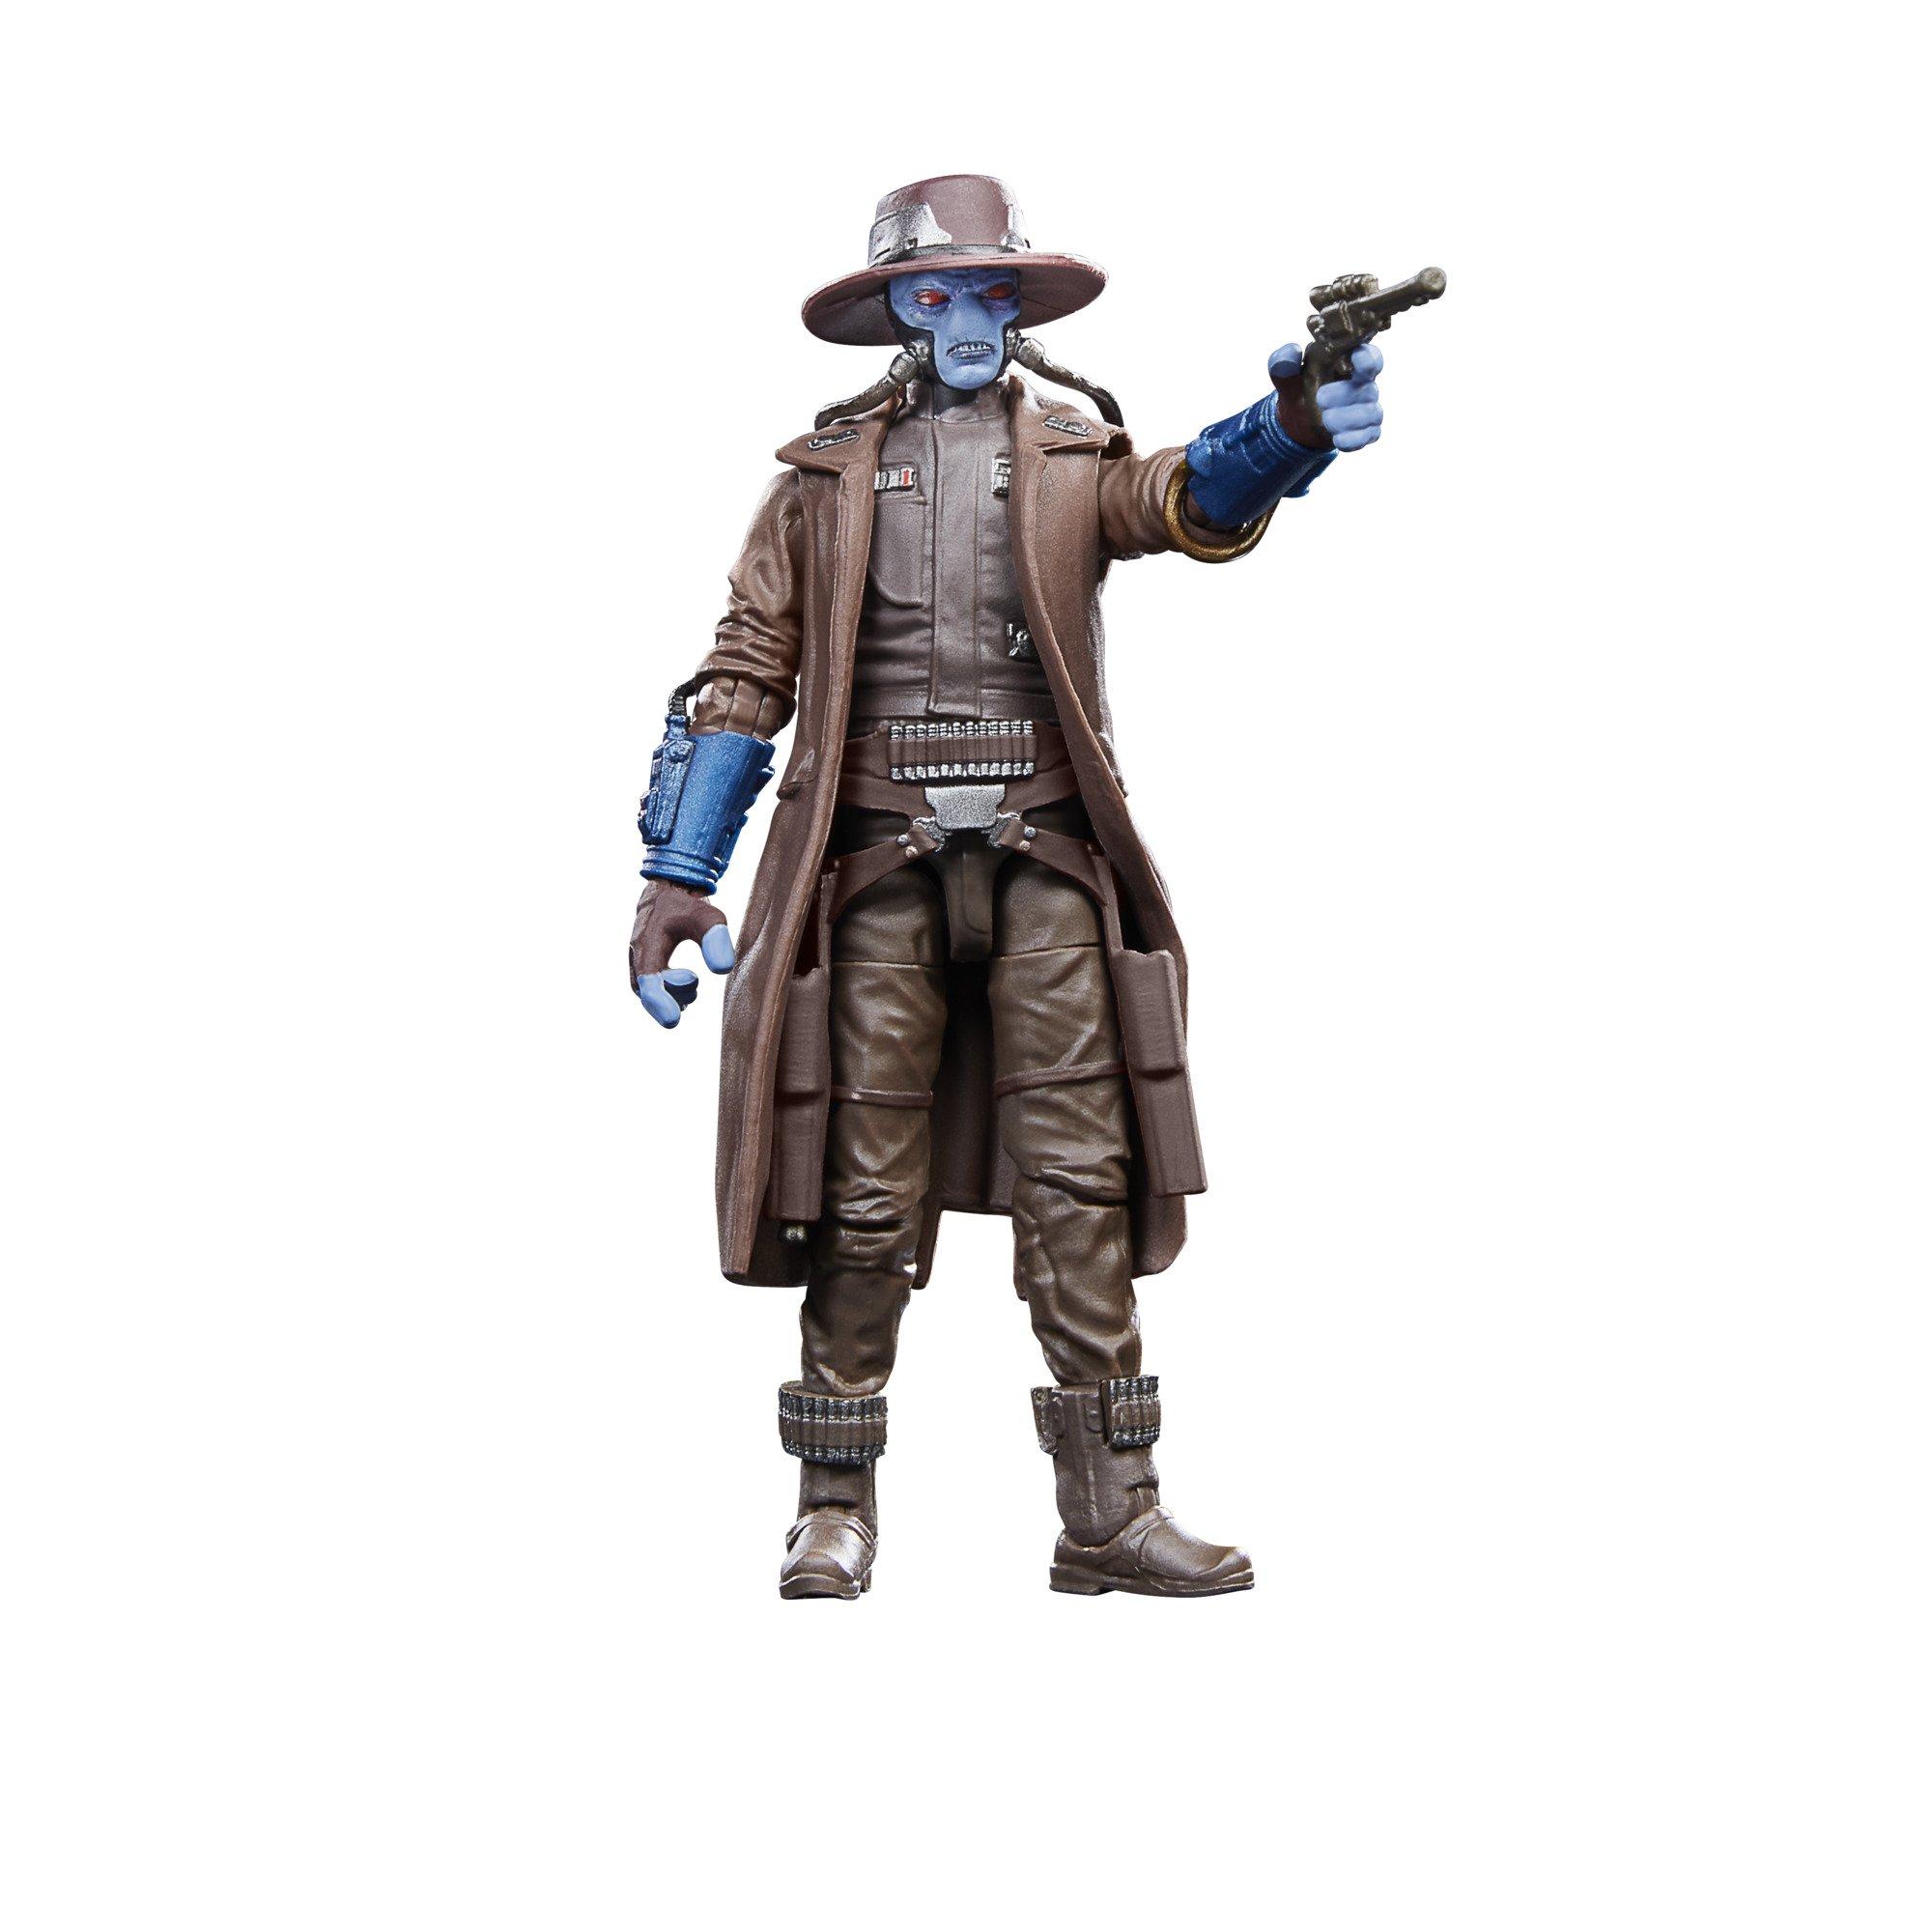 Hasbro Star Wars The Vintage Collection Star Wars: The Book of Boba Fett Cad Bane 3.75-in Action Figure GameStop